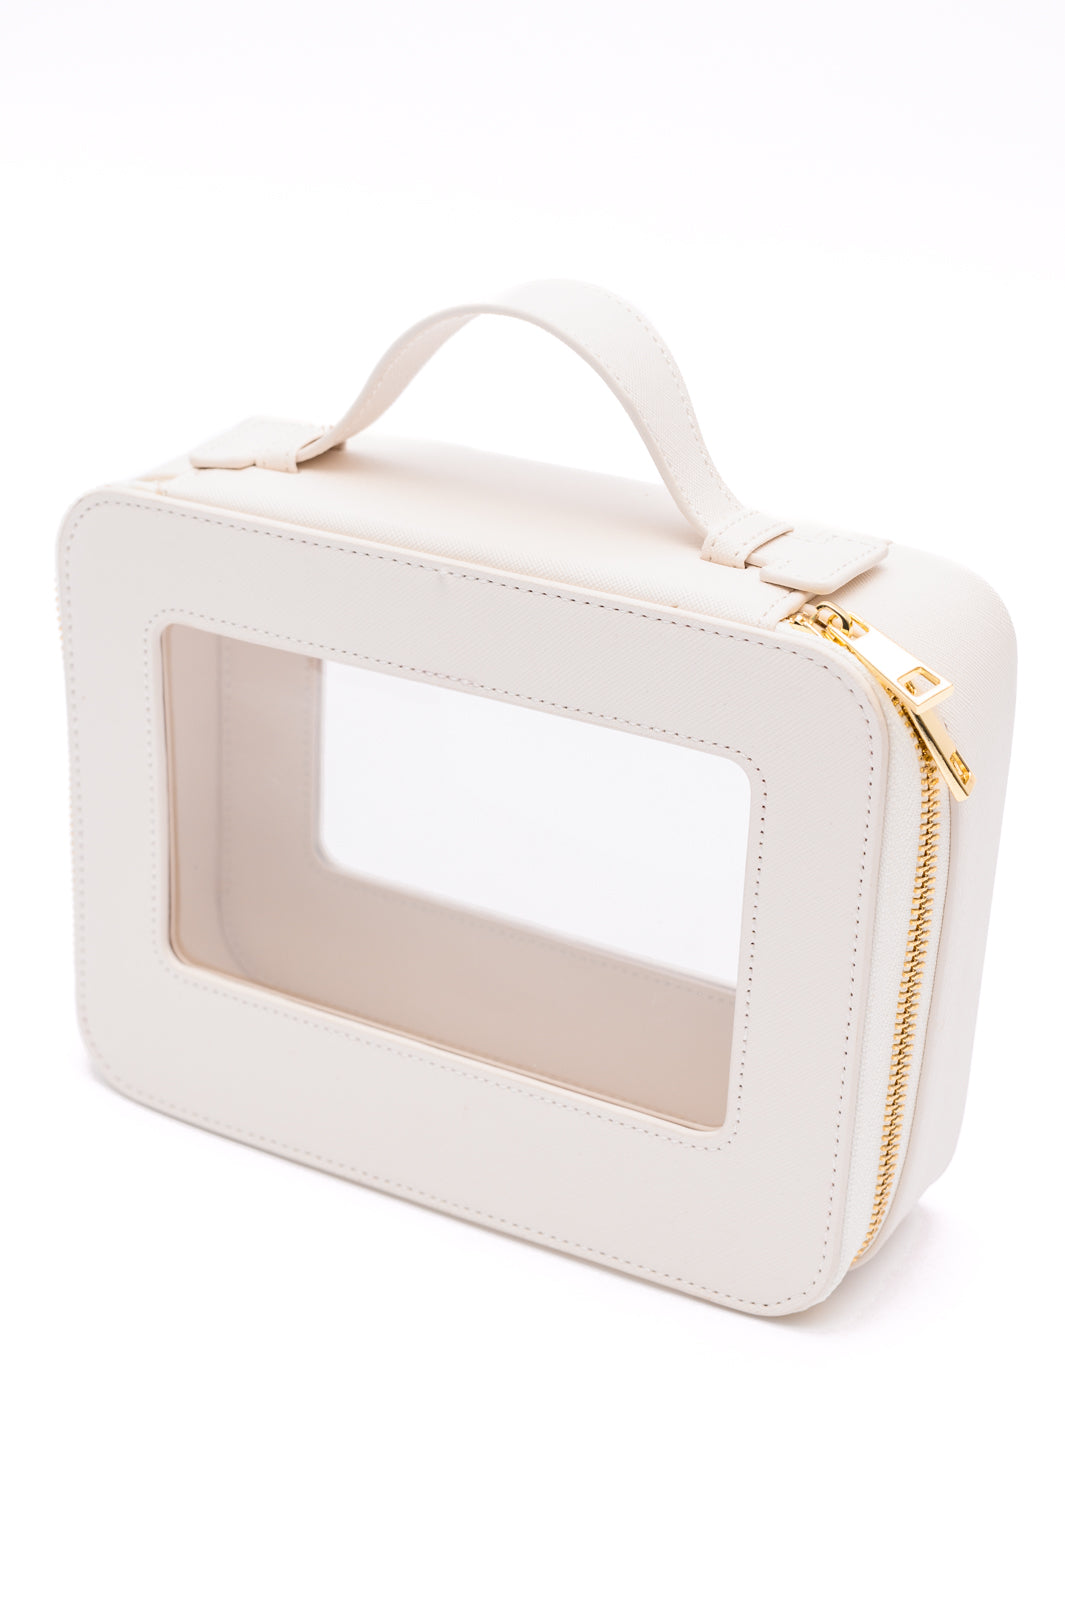 PU Leather Travel Cosmetic Case in Cream-Womens-OS-jsbecigarette Shop for Women & Kids